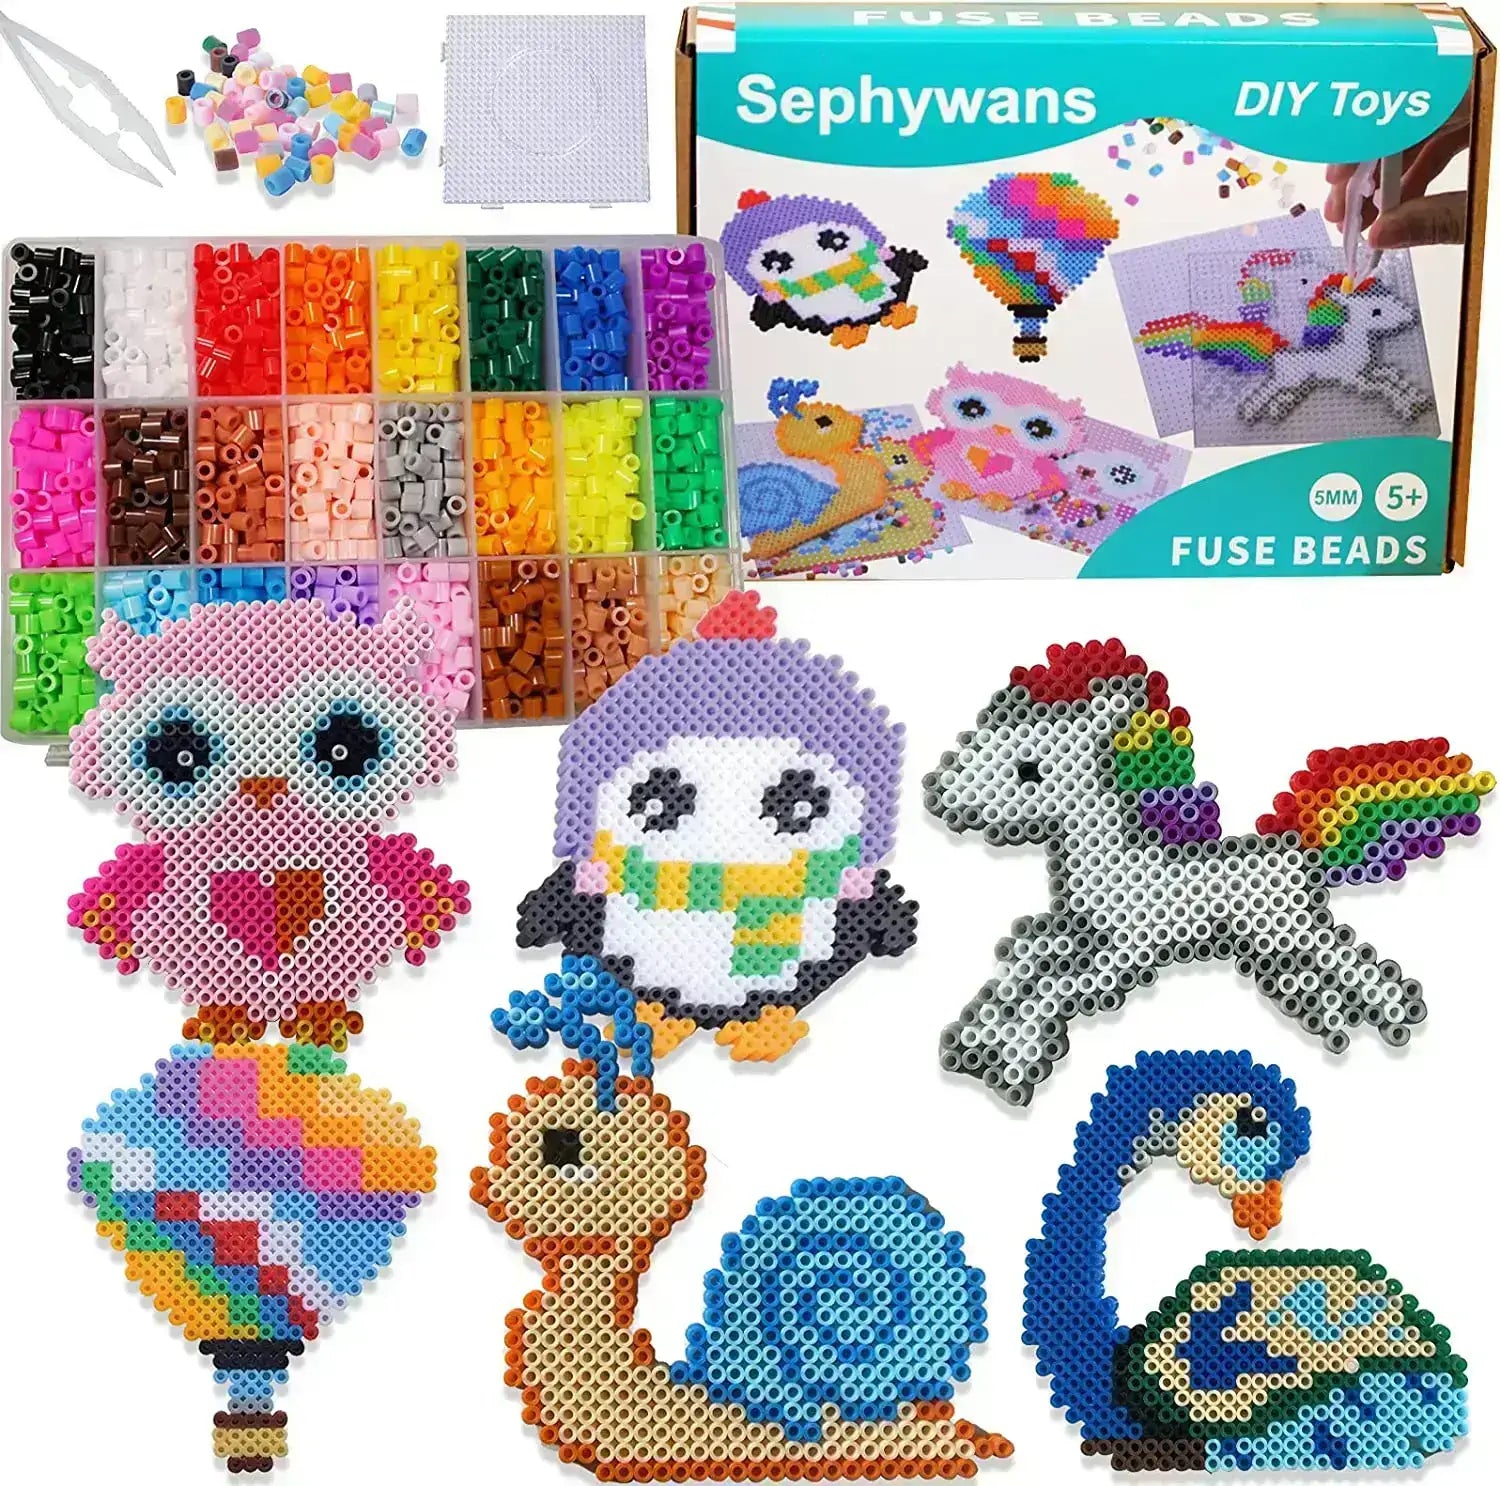 INSCRAFT Fuse Beads, 33000pcs Fuse Beads Kit for Kids, 33 Color 5MM Iron  Beads Set with 150 Patterns, 8 Pegboards, 15 Ironing Paper, 6 Tweezers, 85